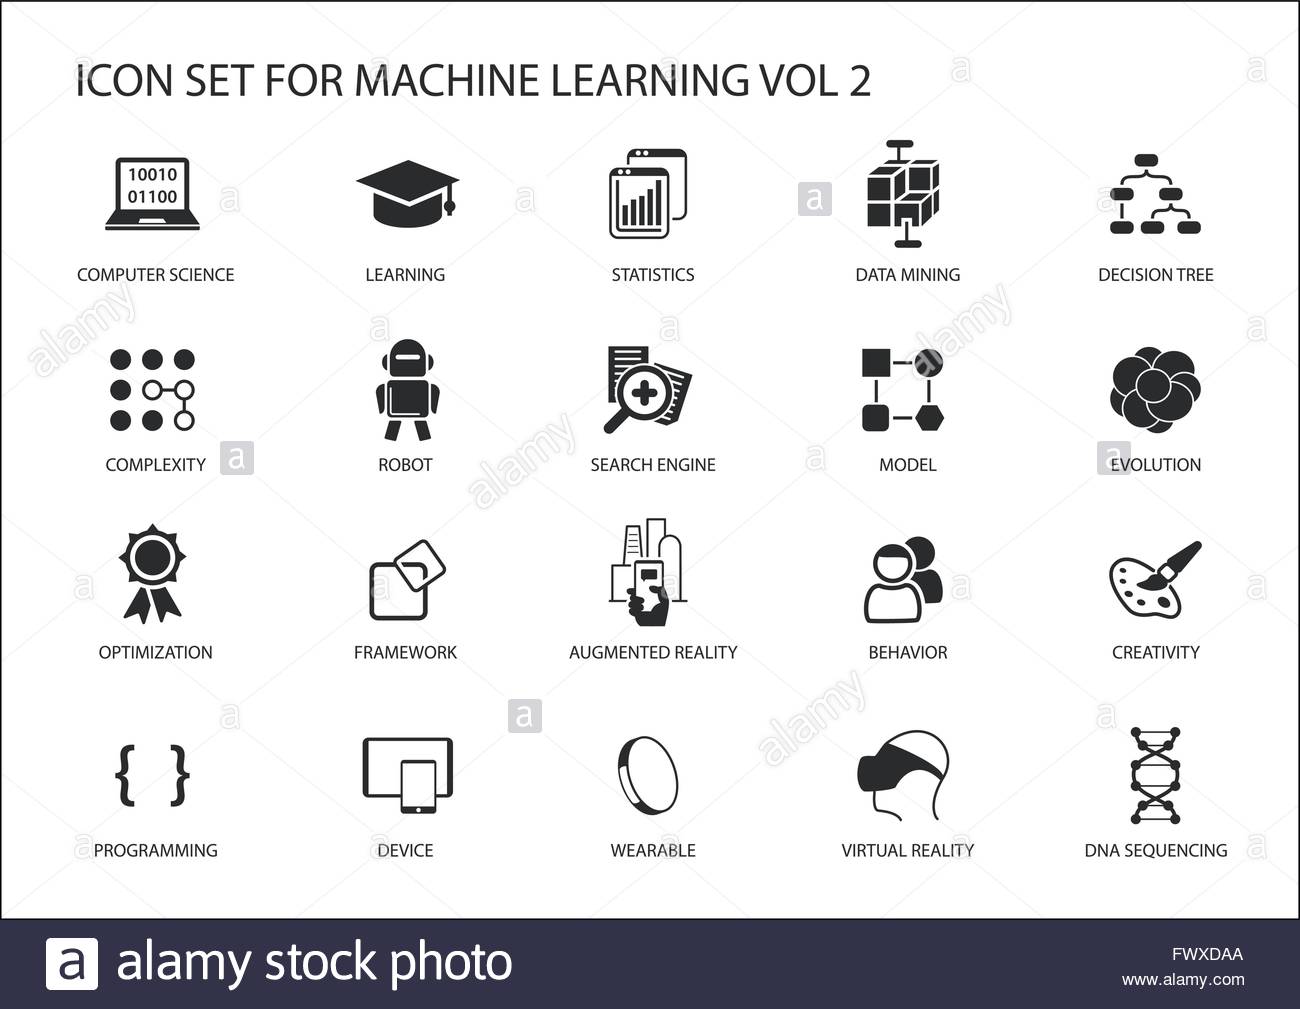 Learning Icons - 965 free vector icons